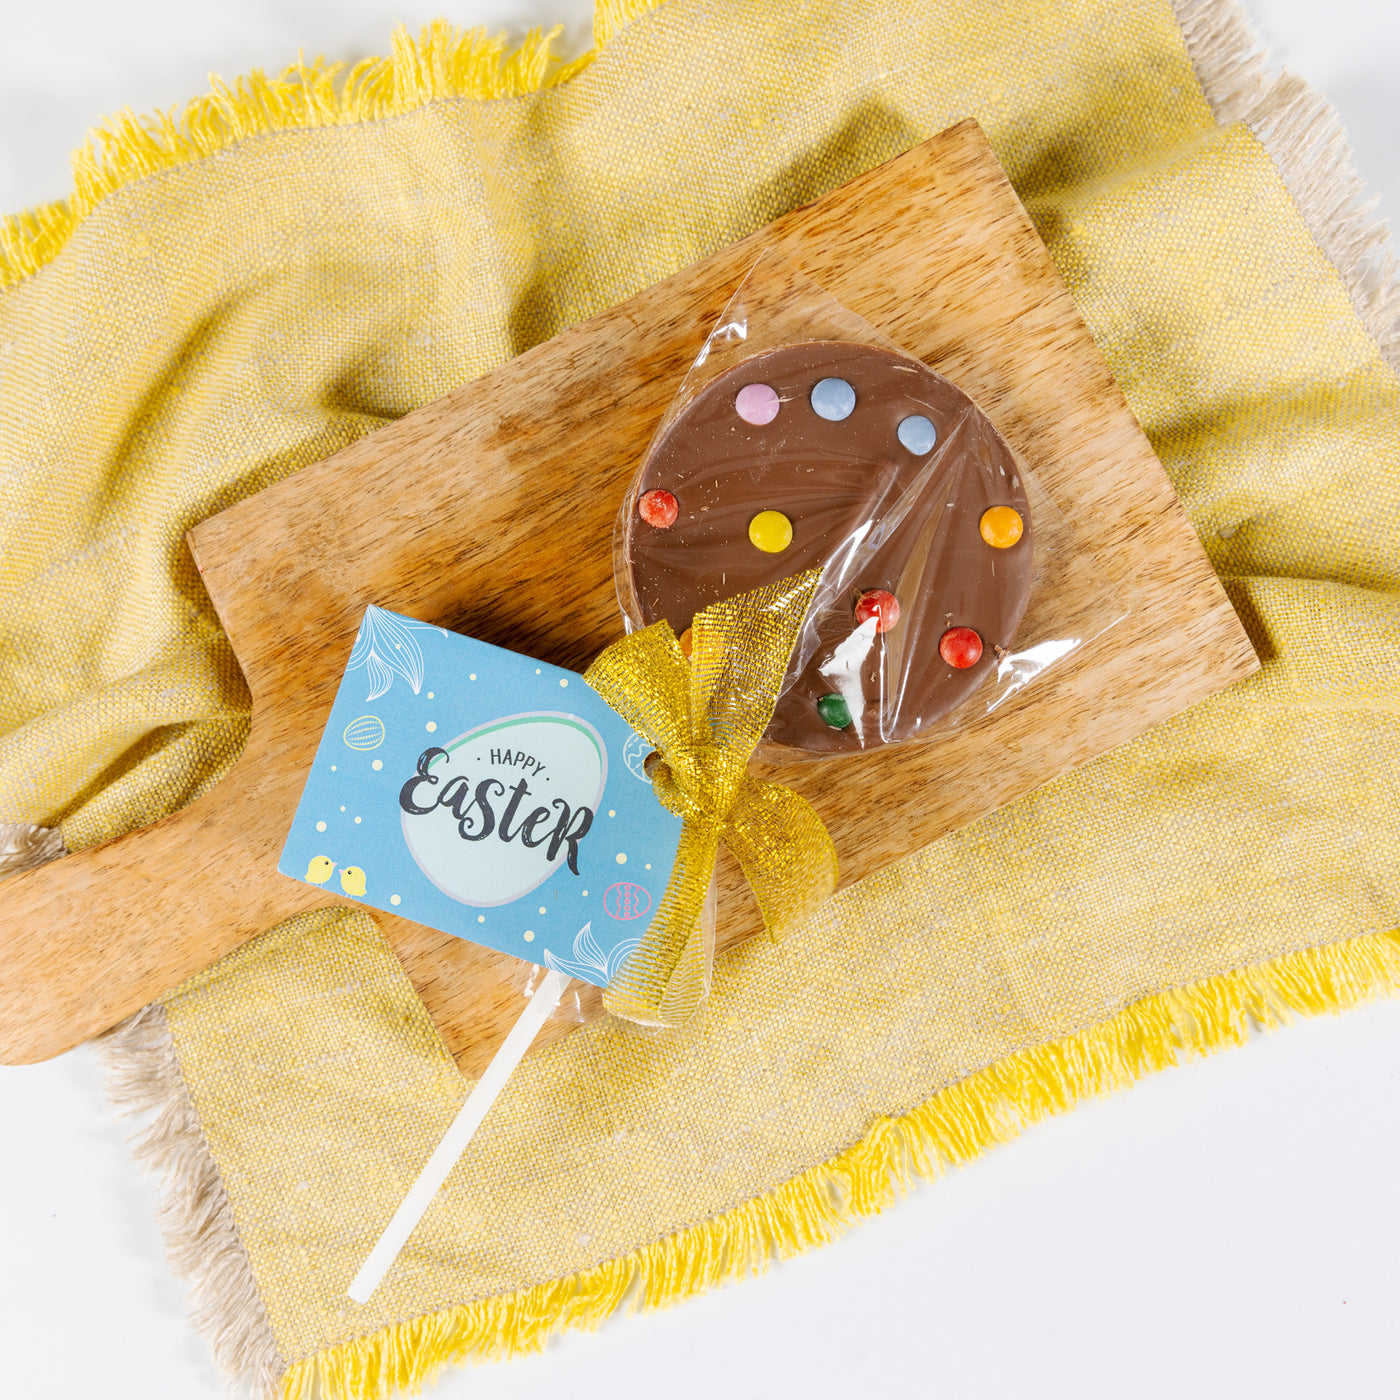 Luxury Chocolate & Candy Bean Easter Lolly